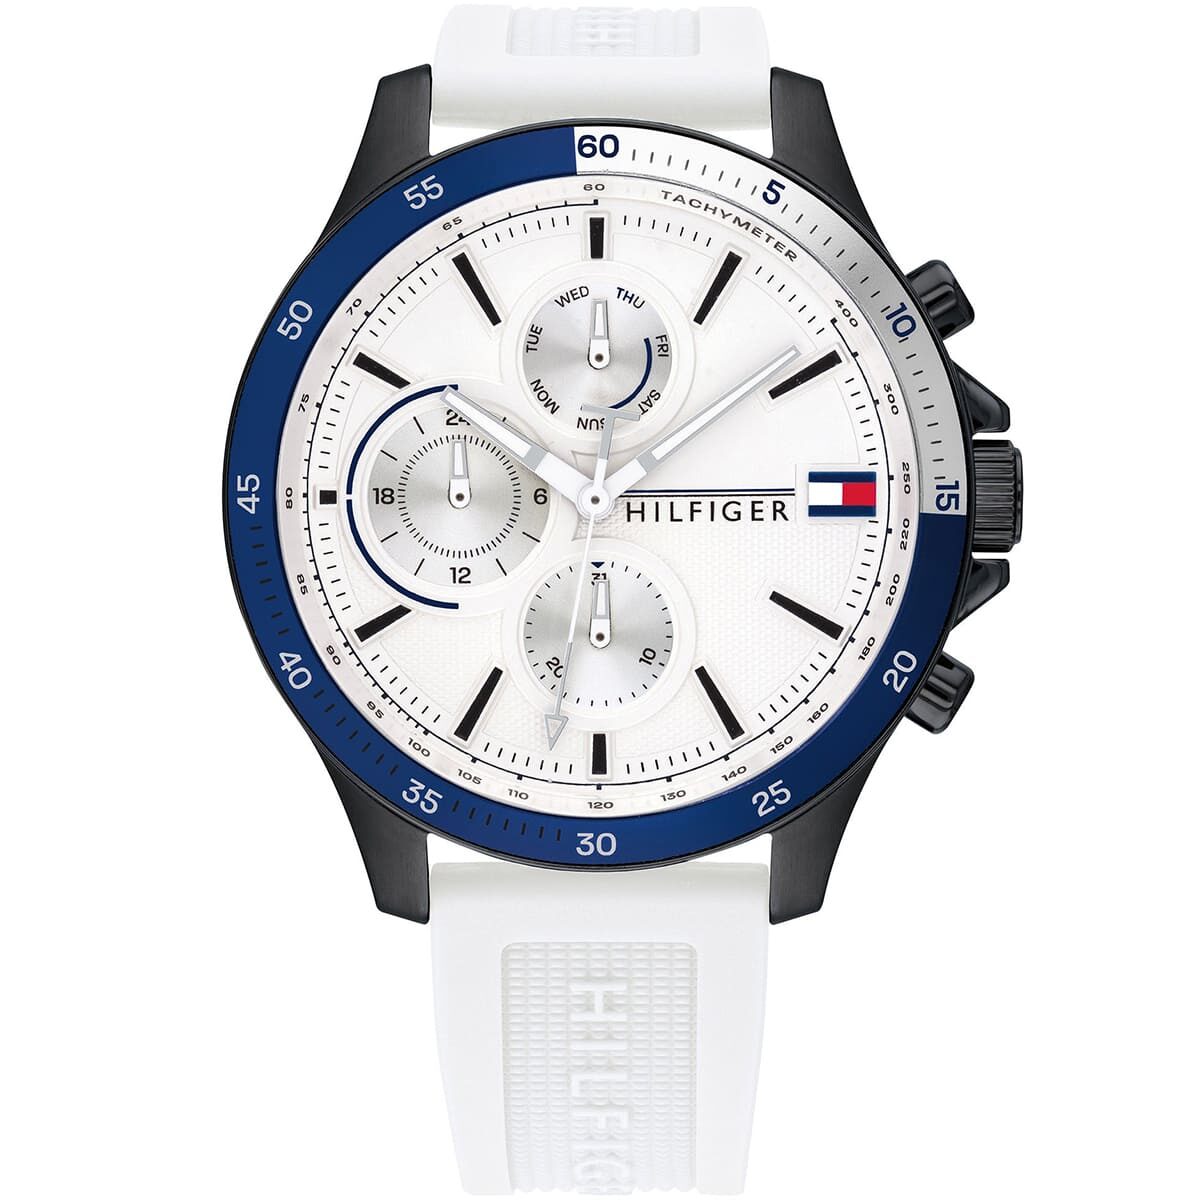 1791723-tommy-hilfiger-watch-men-white-dial-rubber-strap-quartz-battery-analog-monthly-weekly-date-bank